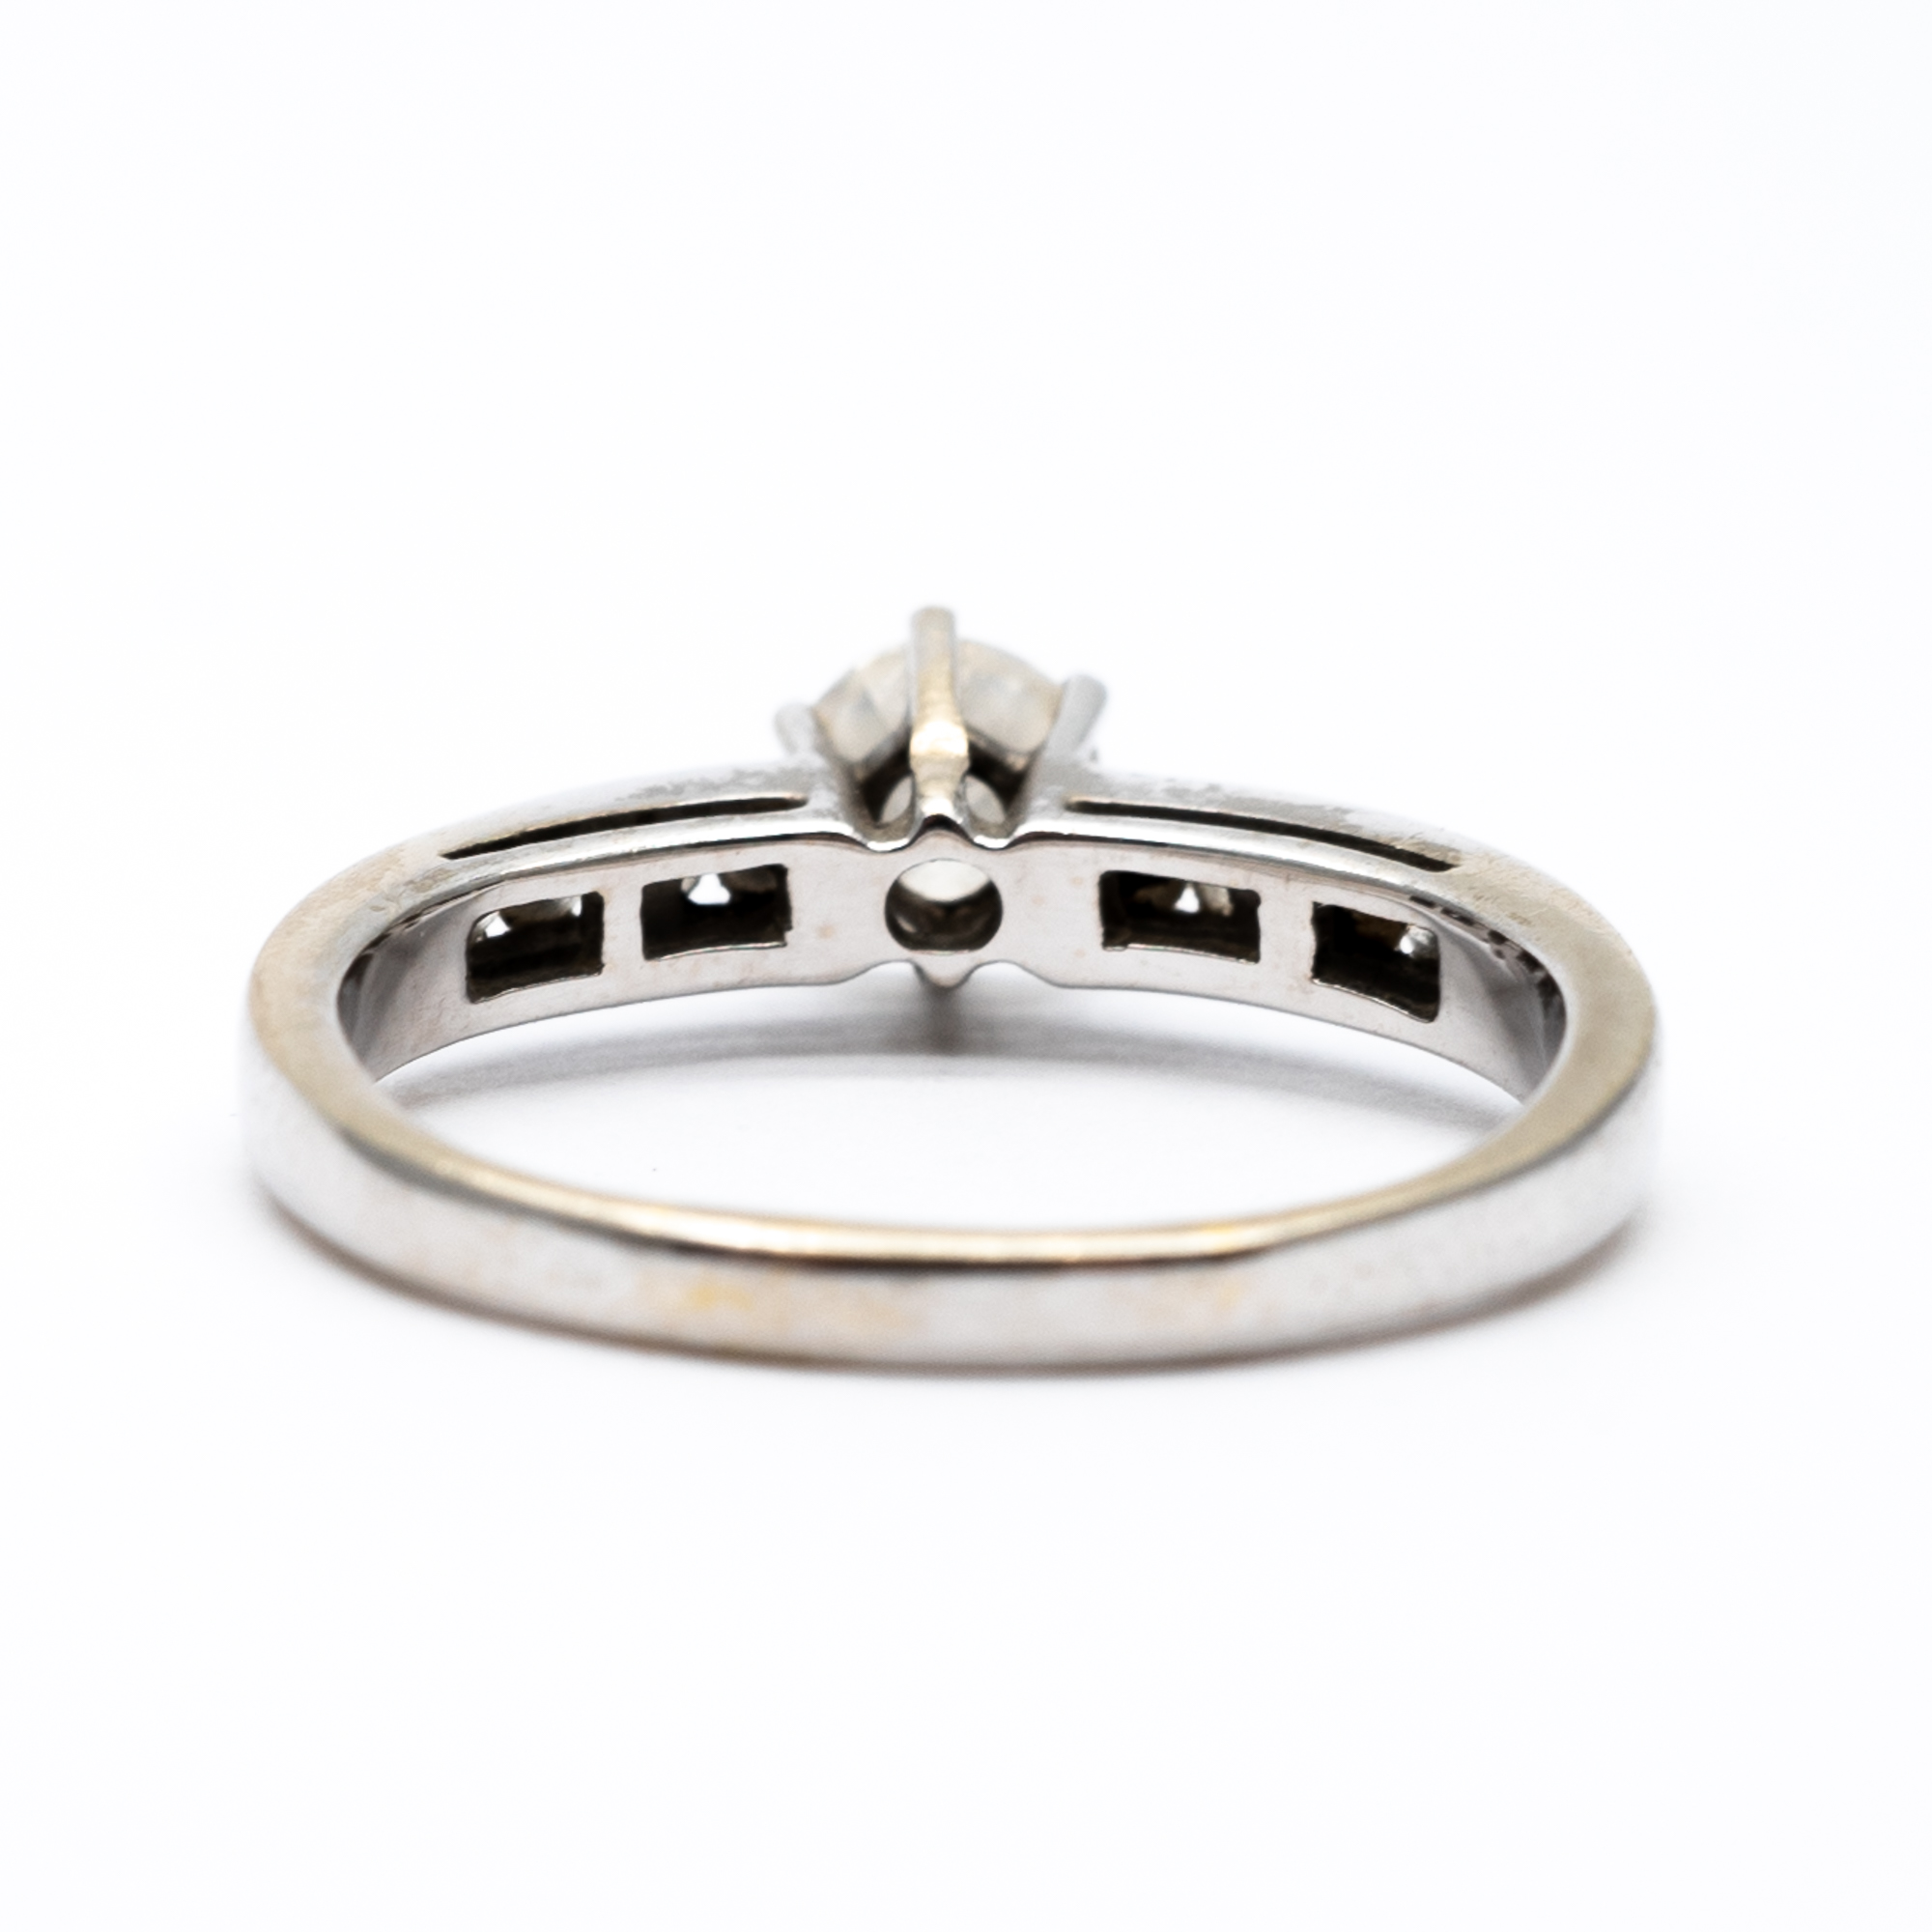 An 18ct white gold single solitaire ring - Image 3 of 6